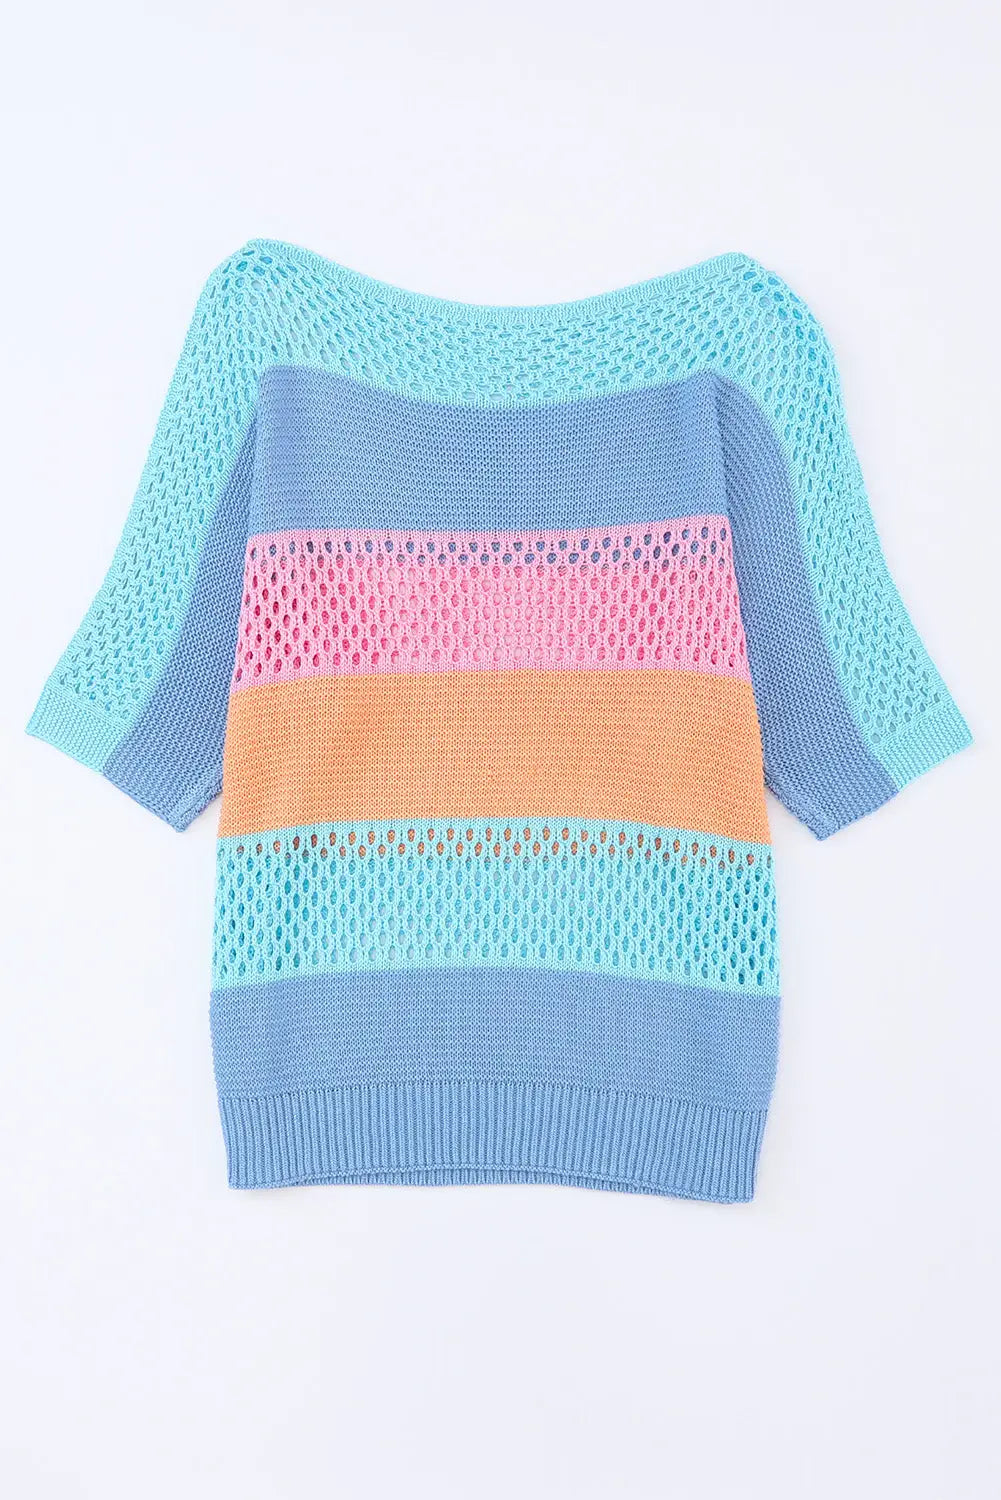 Sky blue knitted eyelet colorblock striped half sleeves top - t-shirts